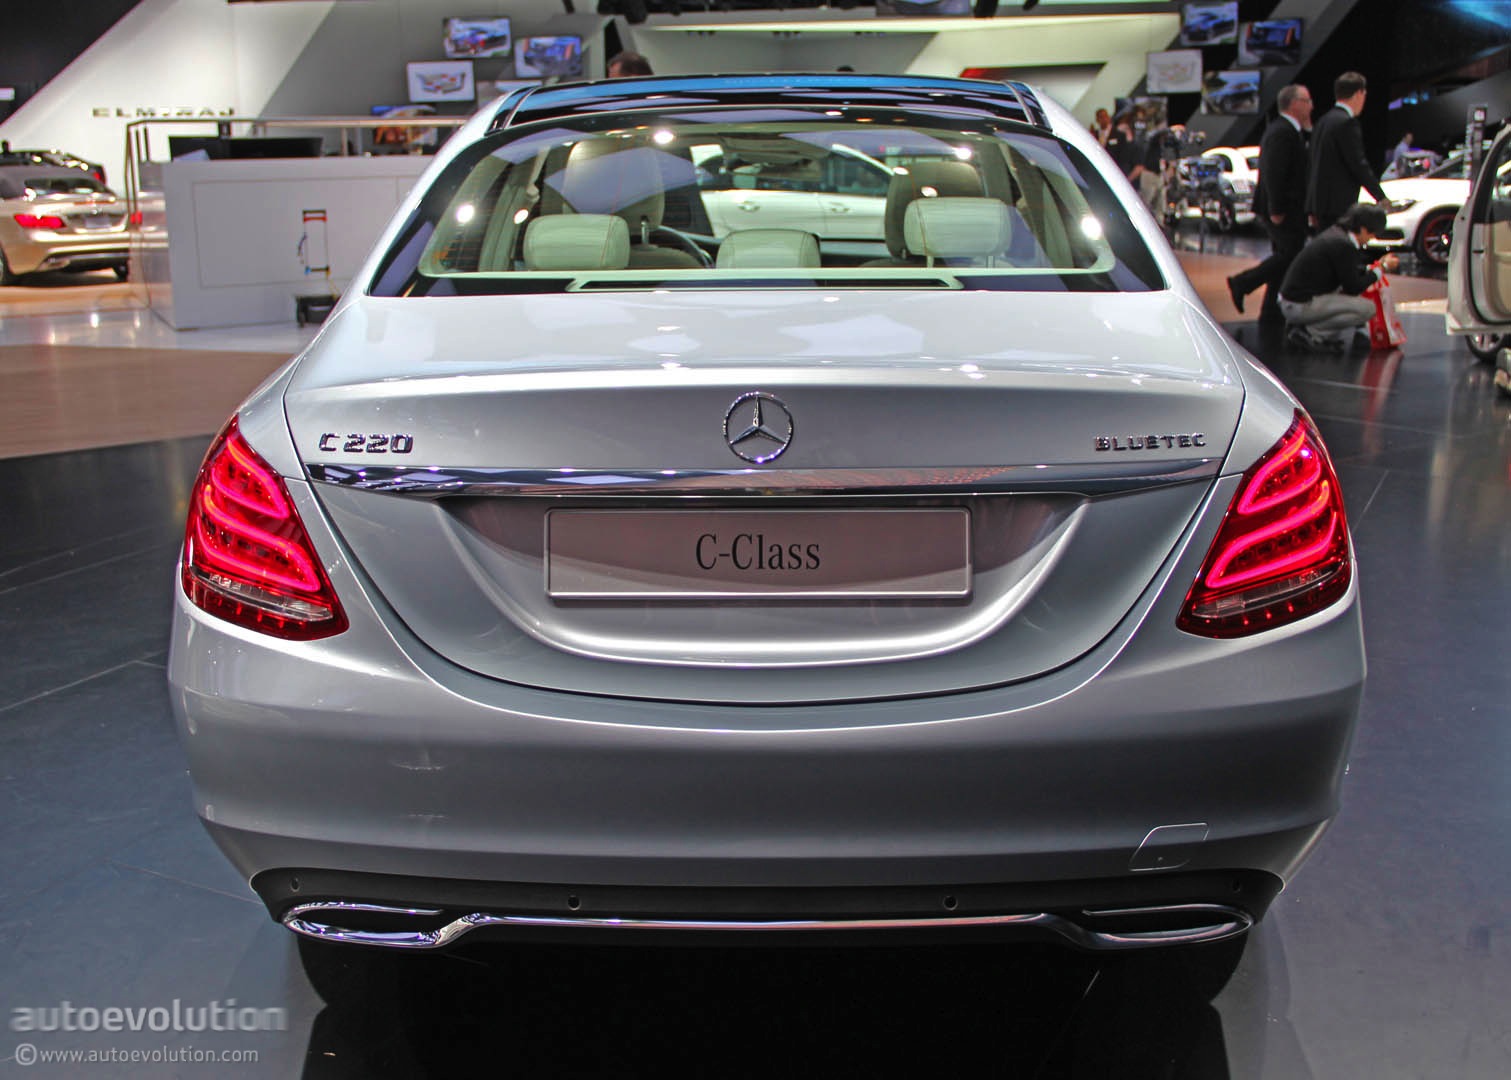 2015 Mercedes C-Class Takes a Luxury Lead in Detroit [Live Photos ...